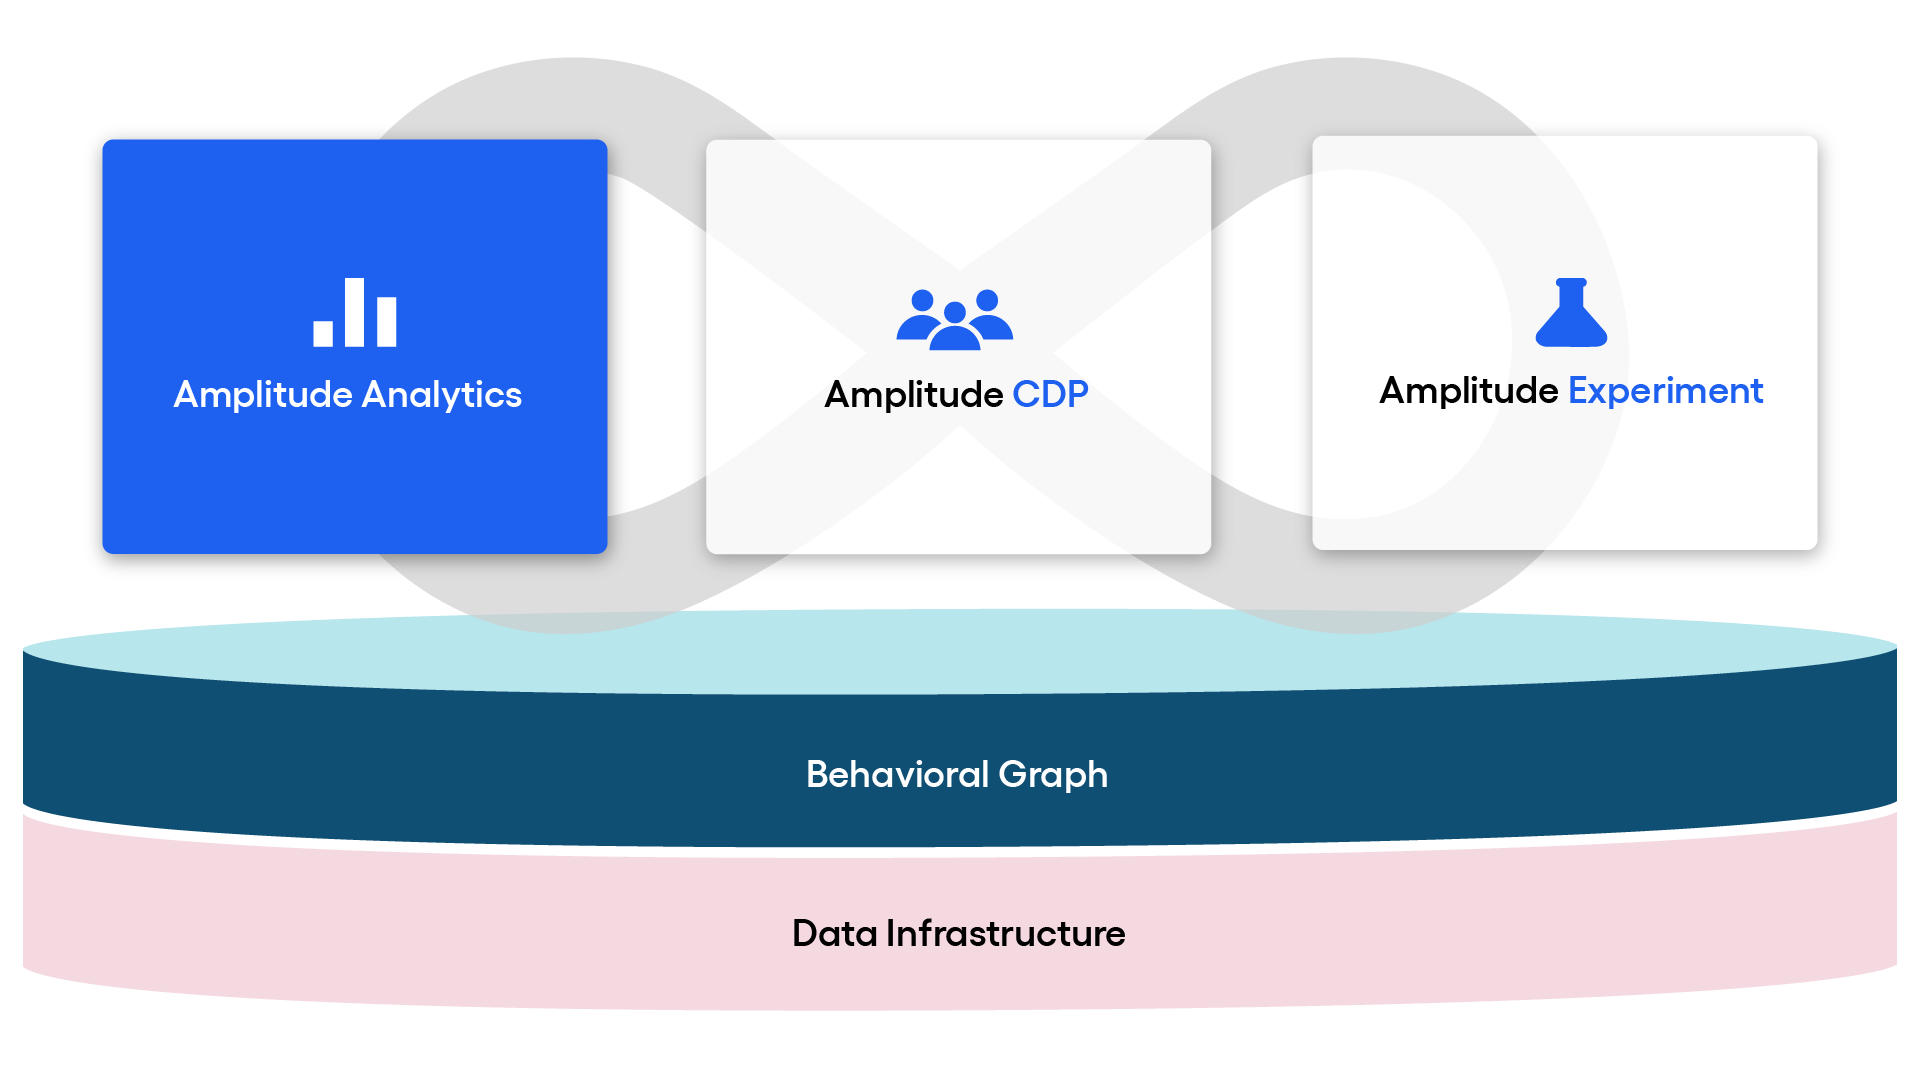 Amplitude analytics, CDP, Experiment, behavioral Graph and Data Infrastructure cards